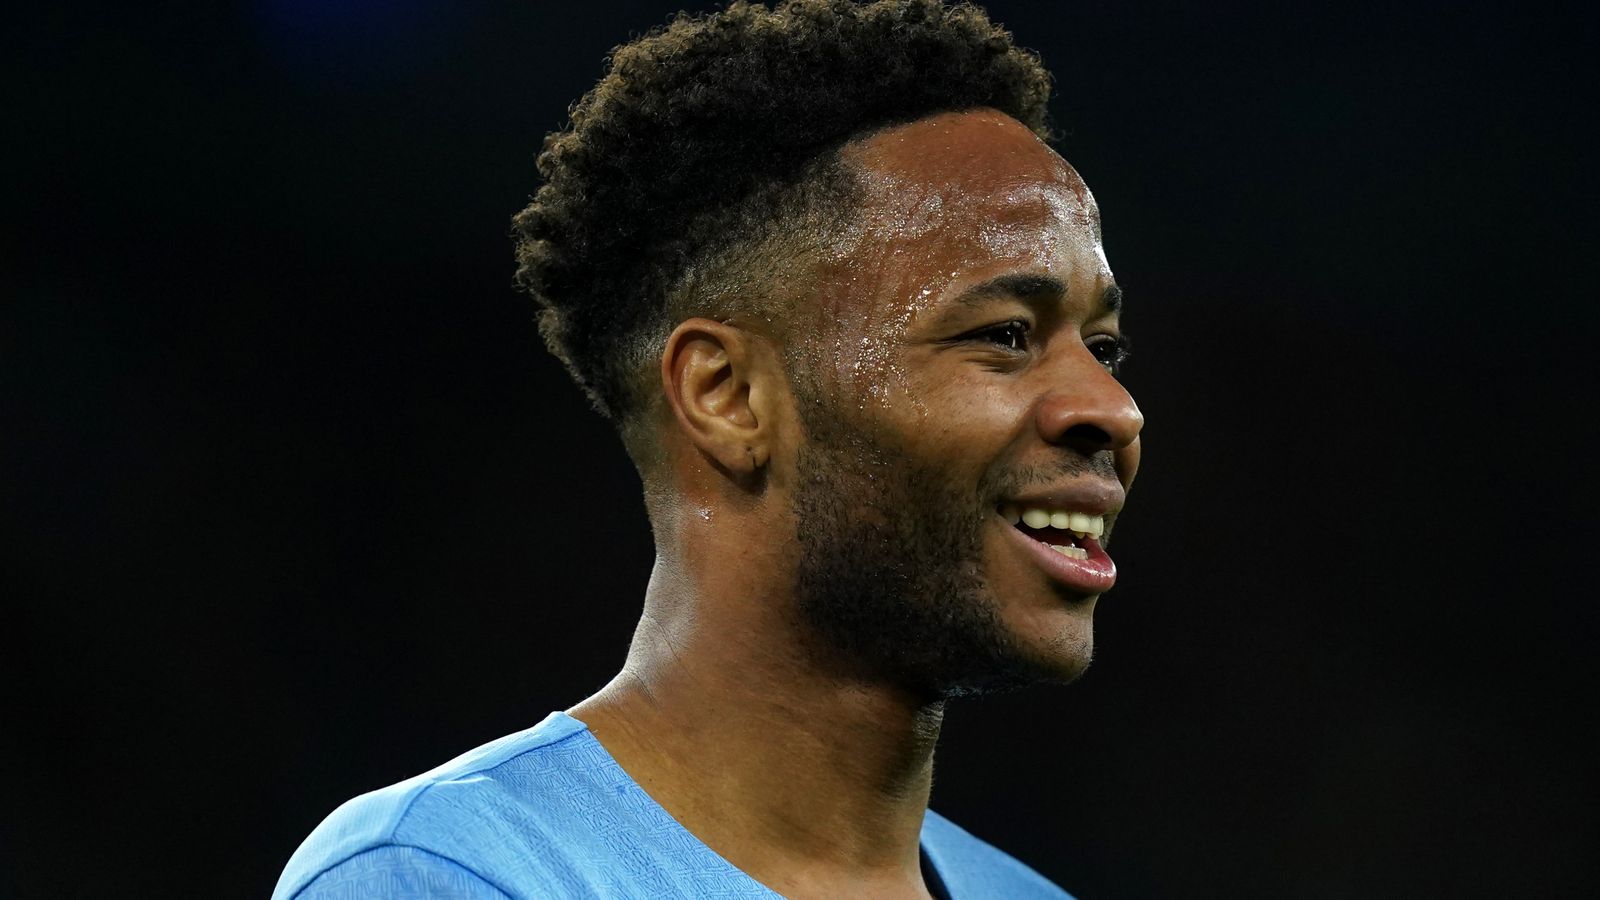 Raheem Sterling to Chelsea: Man City and England forward might be underrated because finishing is misunderstood